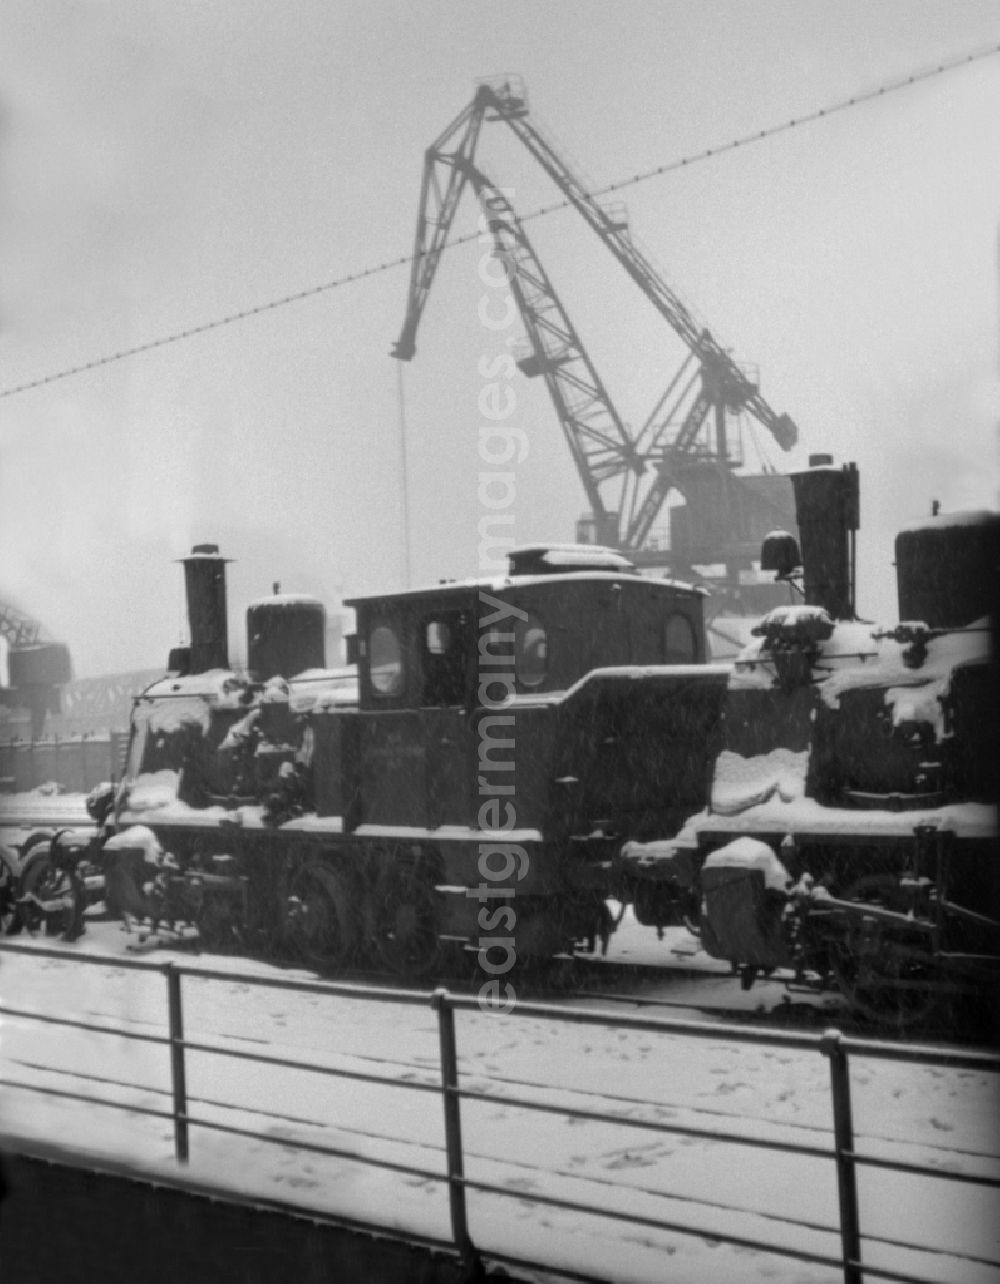 Berlin: Steam locomotive covered with snow in winter as a shunting locomotive in the port area of the Berlin Osthafen in motion on the Alt-Stralau street in the district of Friedrichshain in Berlin East Berlin on the territory of the former GDR, German Democratic Republic